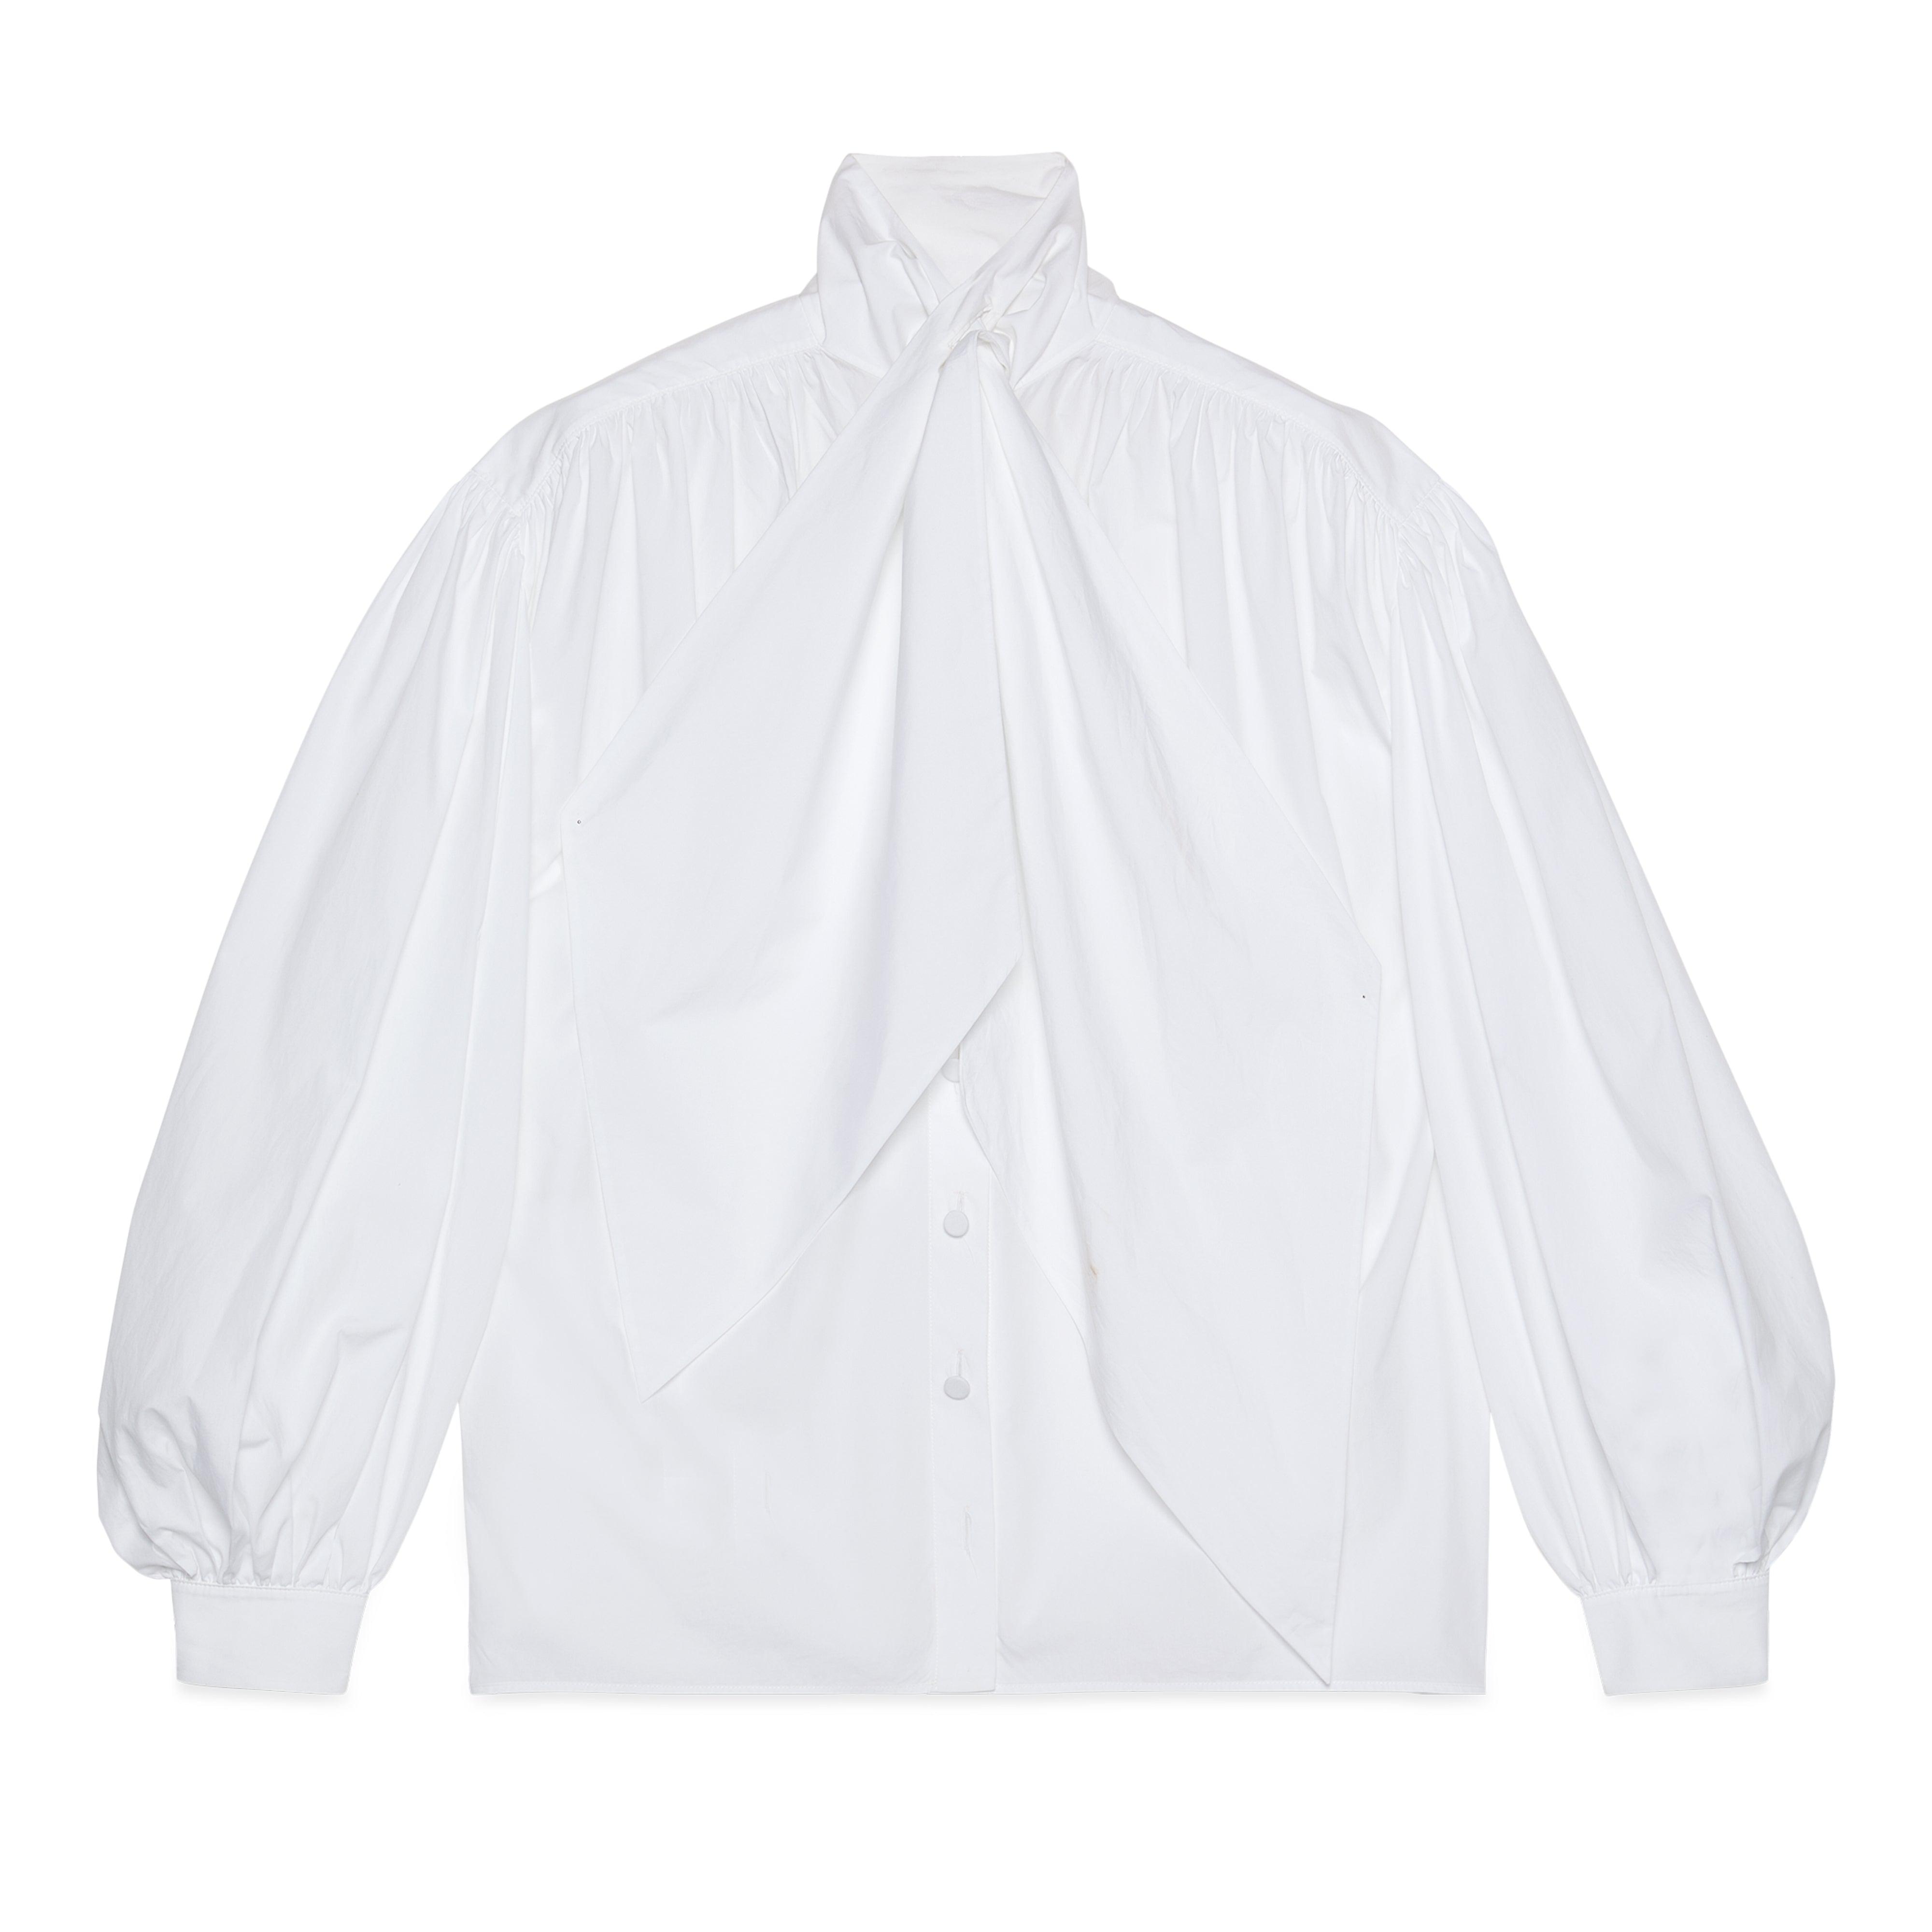 Gucci Women's Cotton Poplin Shirt with Tie Front (White) by GUCCI